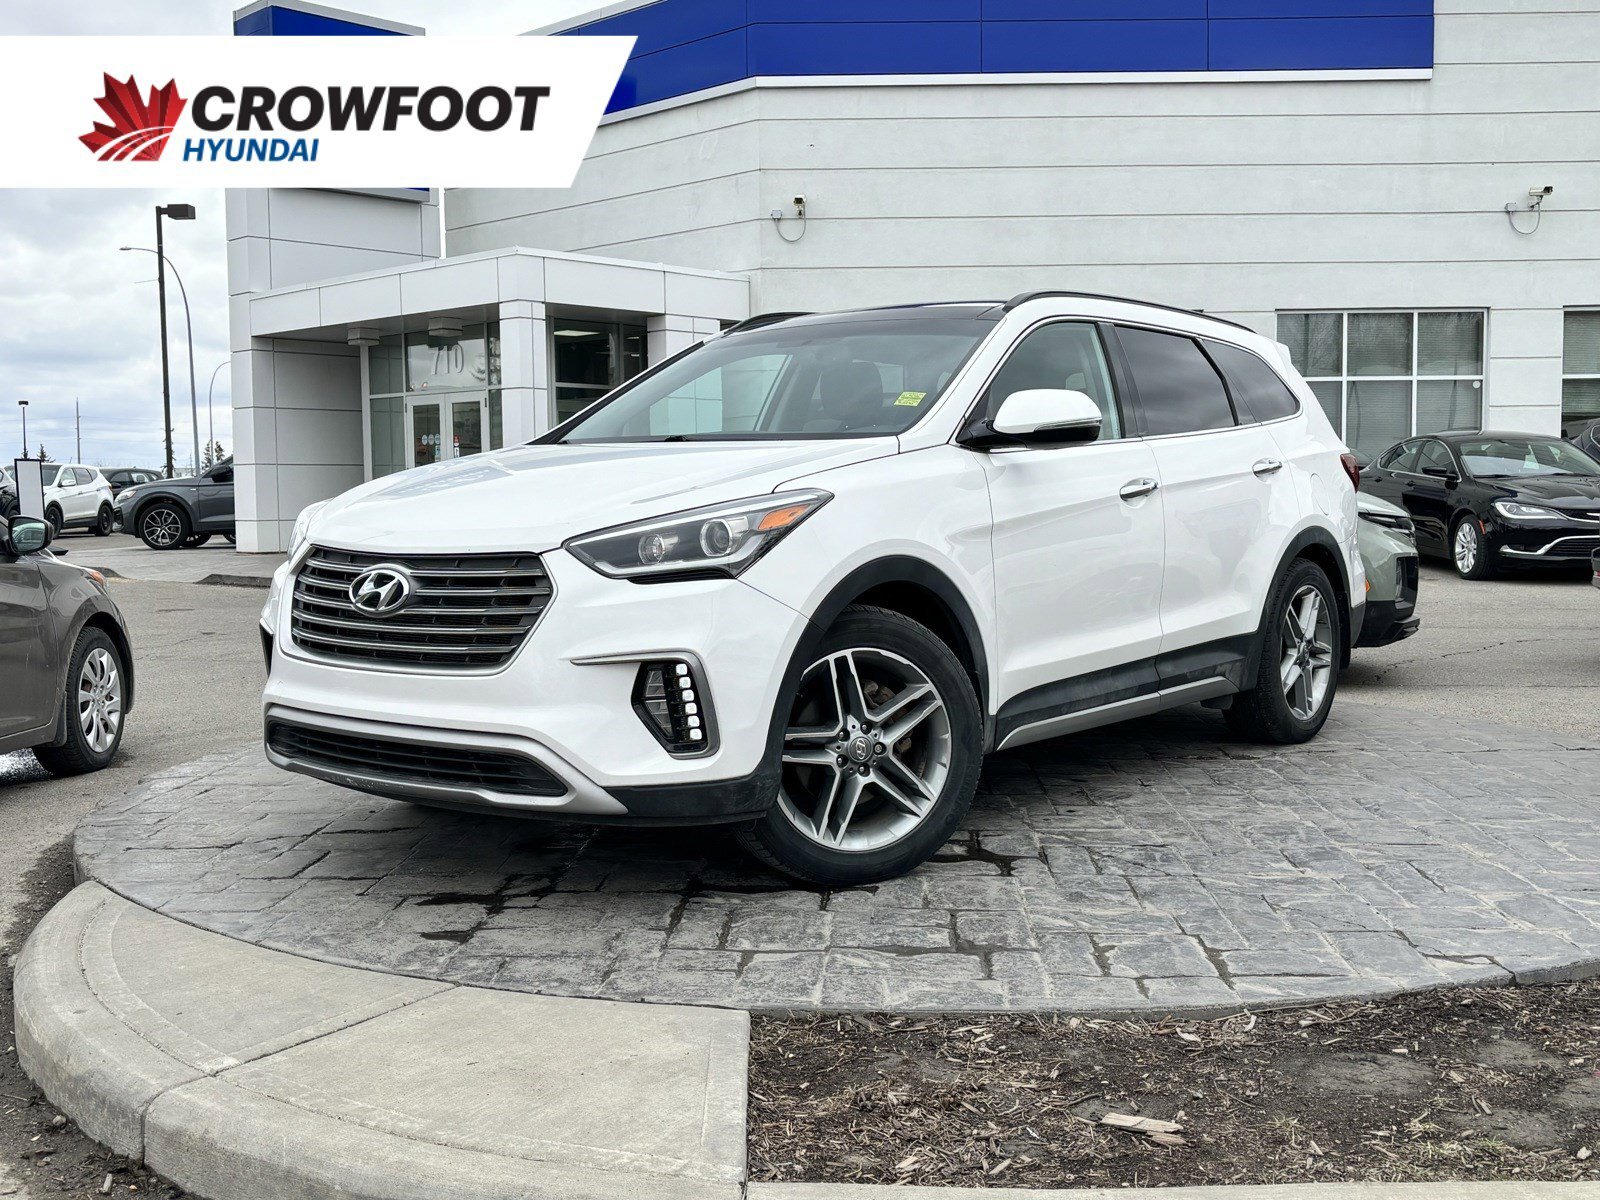 2017 Hyundai Santa Fe XL Limited - 7 Pass, No Accidents, One Owner, AWD, Le